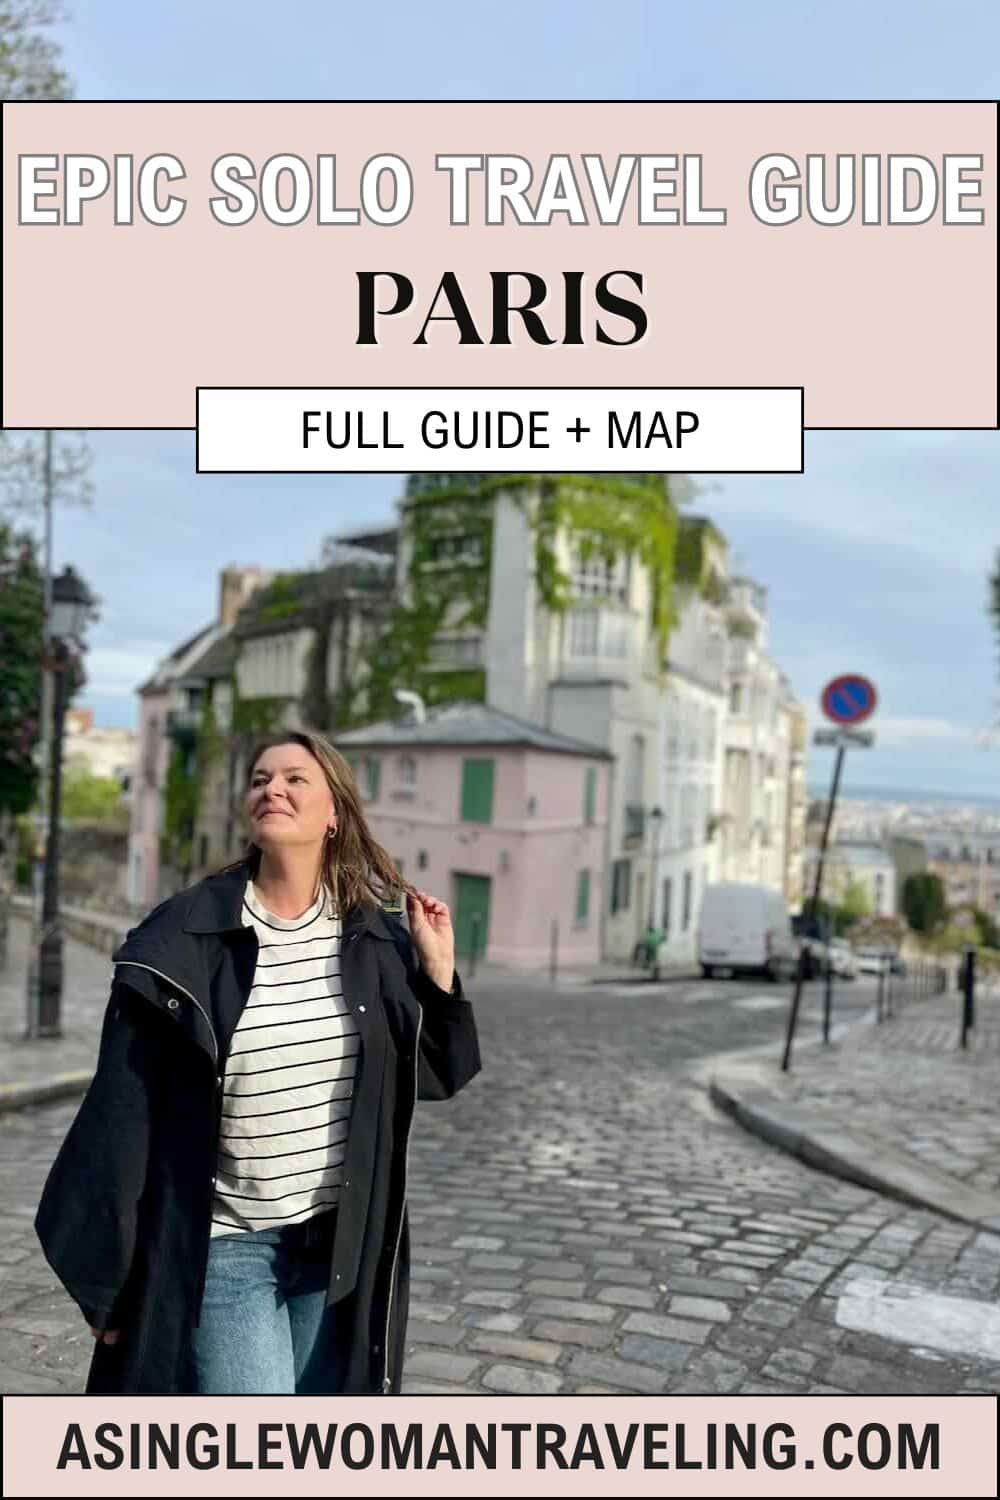 A woman stands on a cobblestone street in Paris, smiling and looking off to the side. She is wearing a black coat over a striped top and jeans. The background shows colorful buildings and a quiet, picturesque street. The text overlay reads "EPIC SOLO TRAVEL GUIDE PARIS, FULL GUIDE + MAP" and includes the website "ASINGLEWOMANTRAVELING.COM